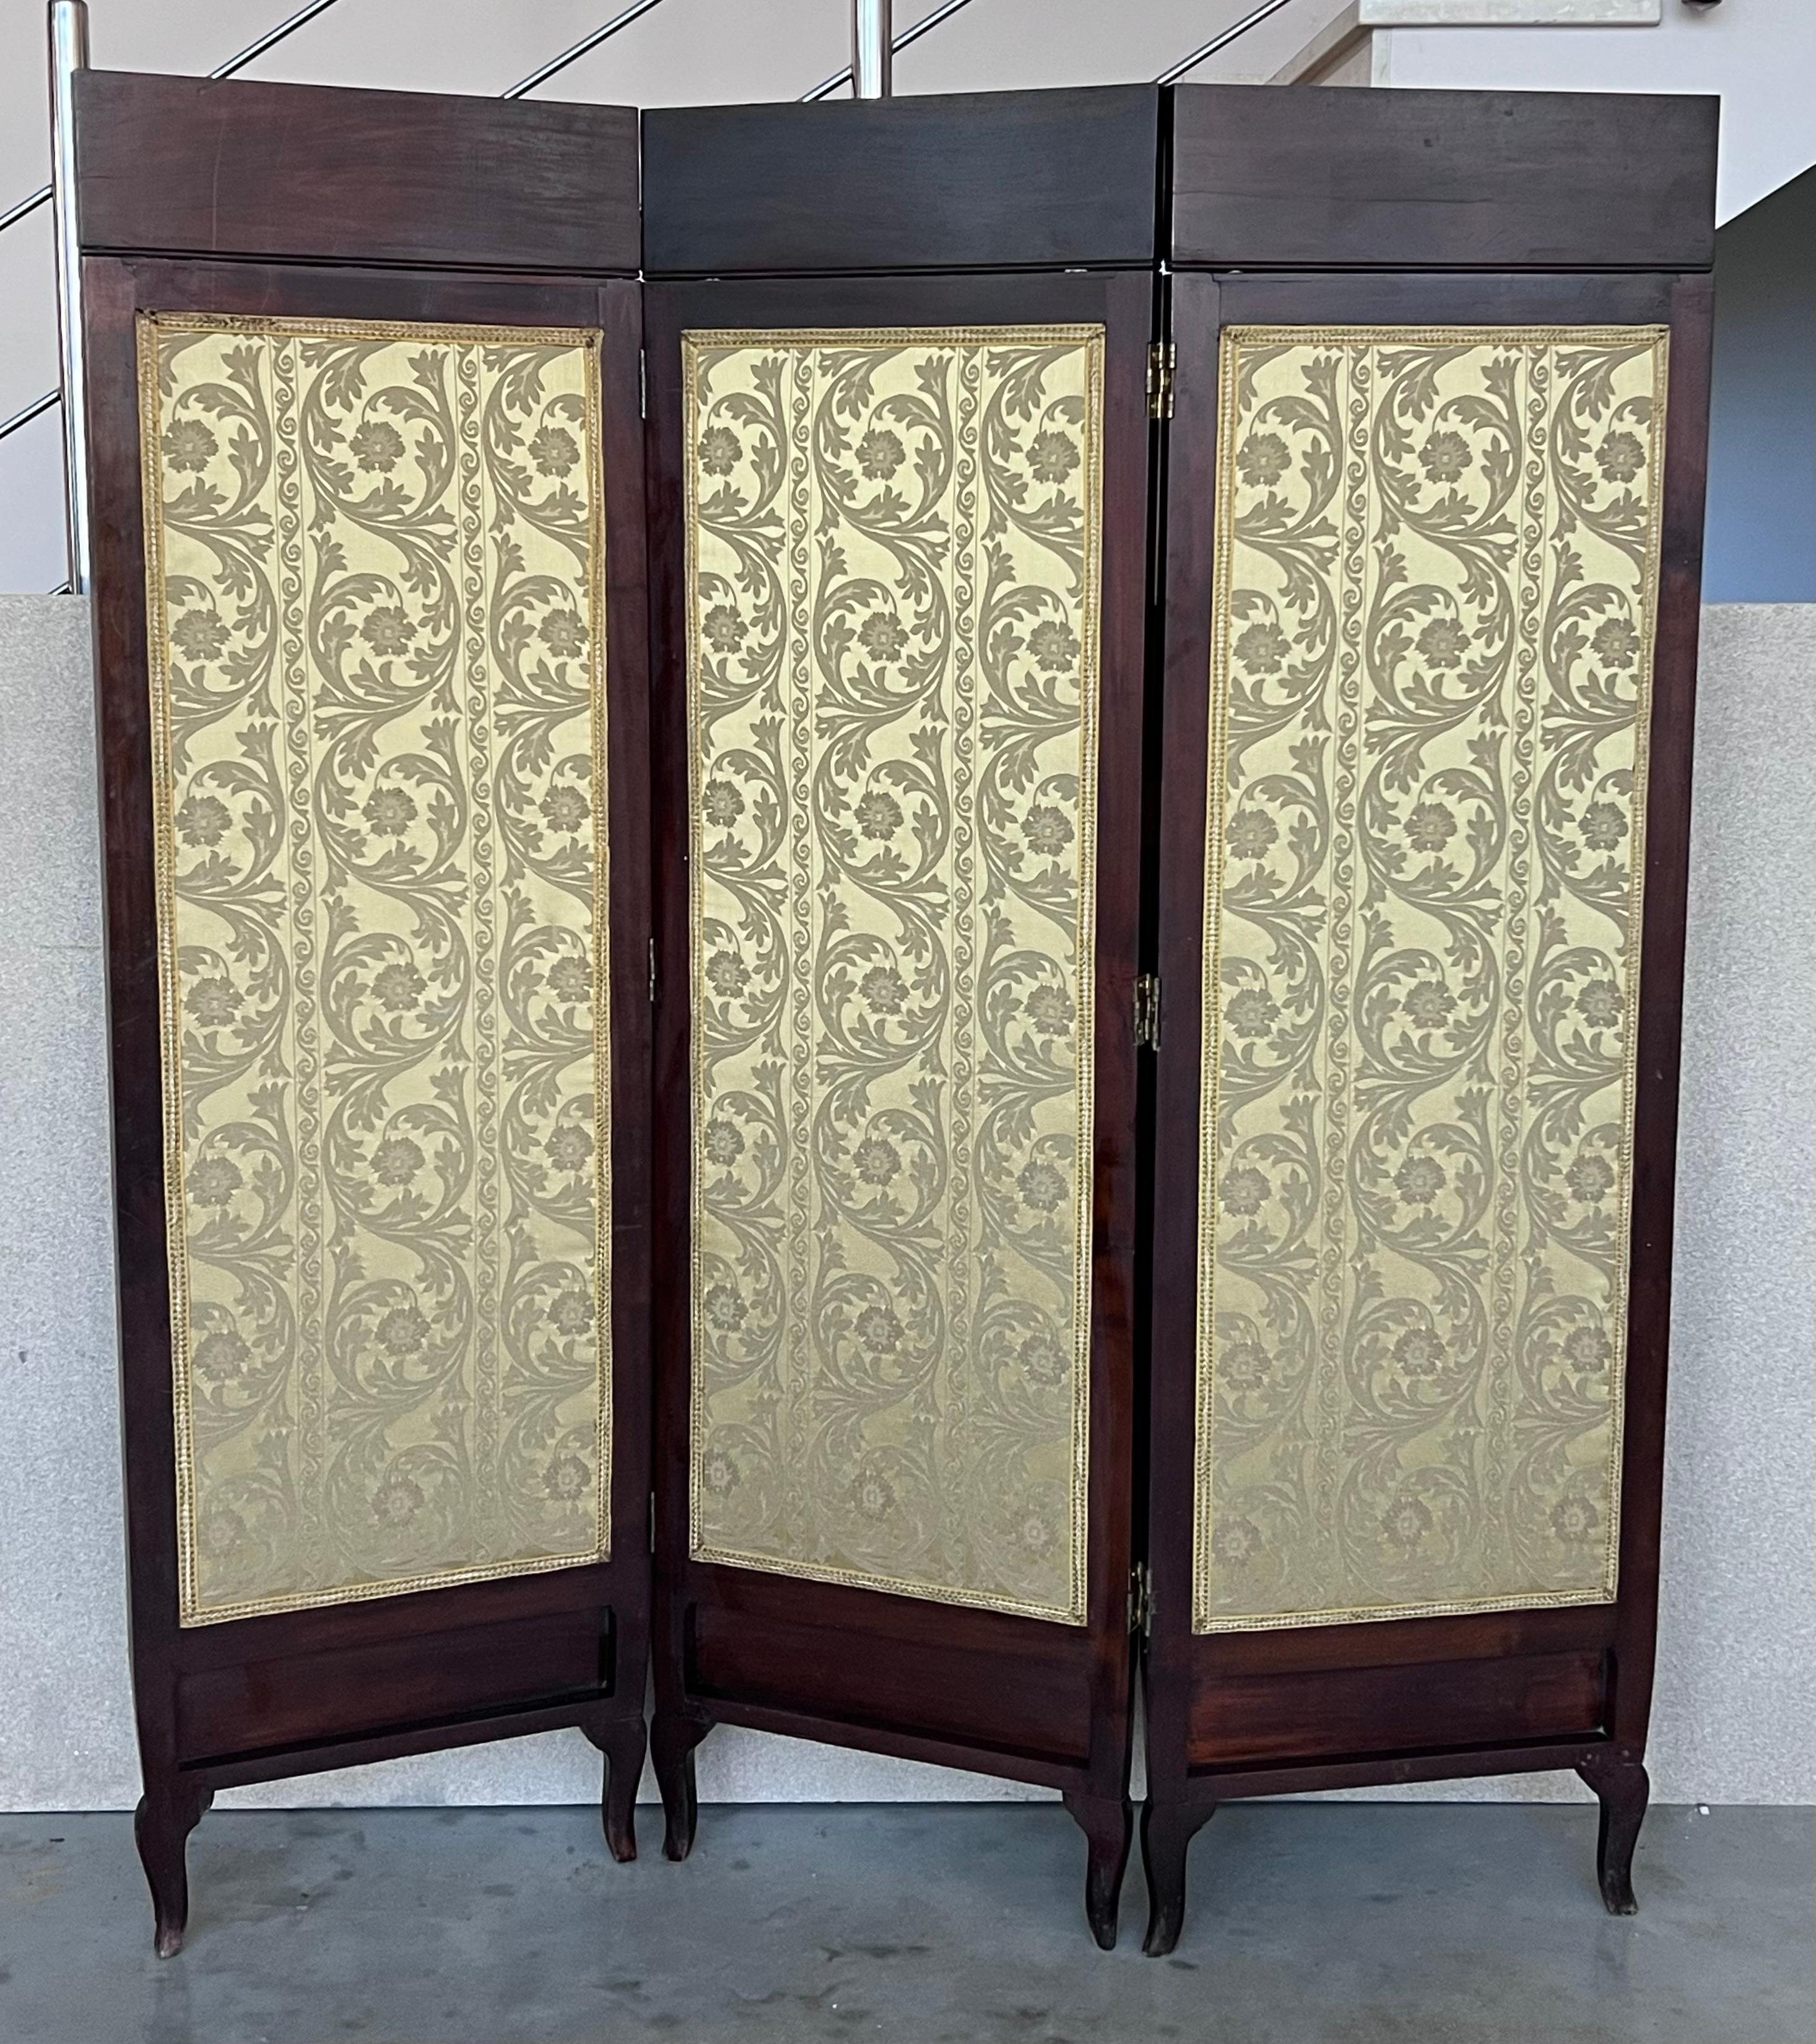 French Empire Mahogany 3-Fold Screen with Bronze Mounts In Good Condition For Sale In Miami, FL